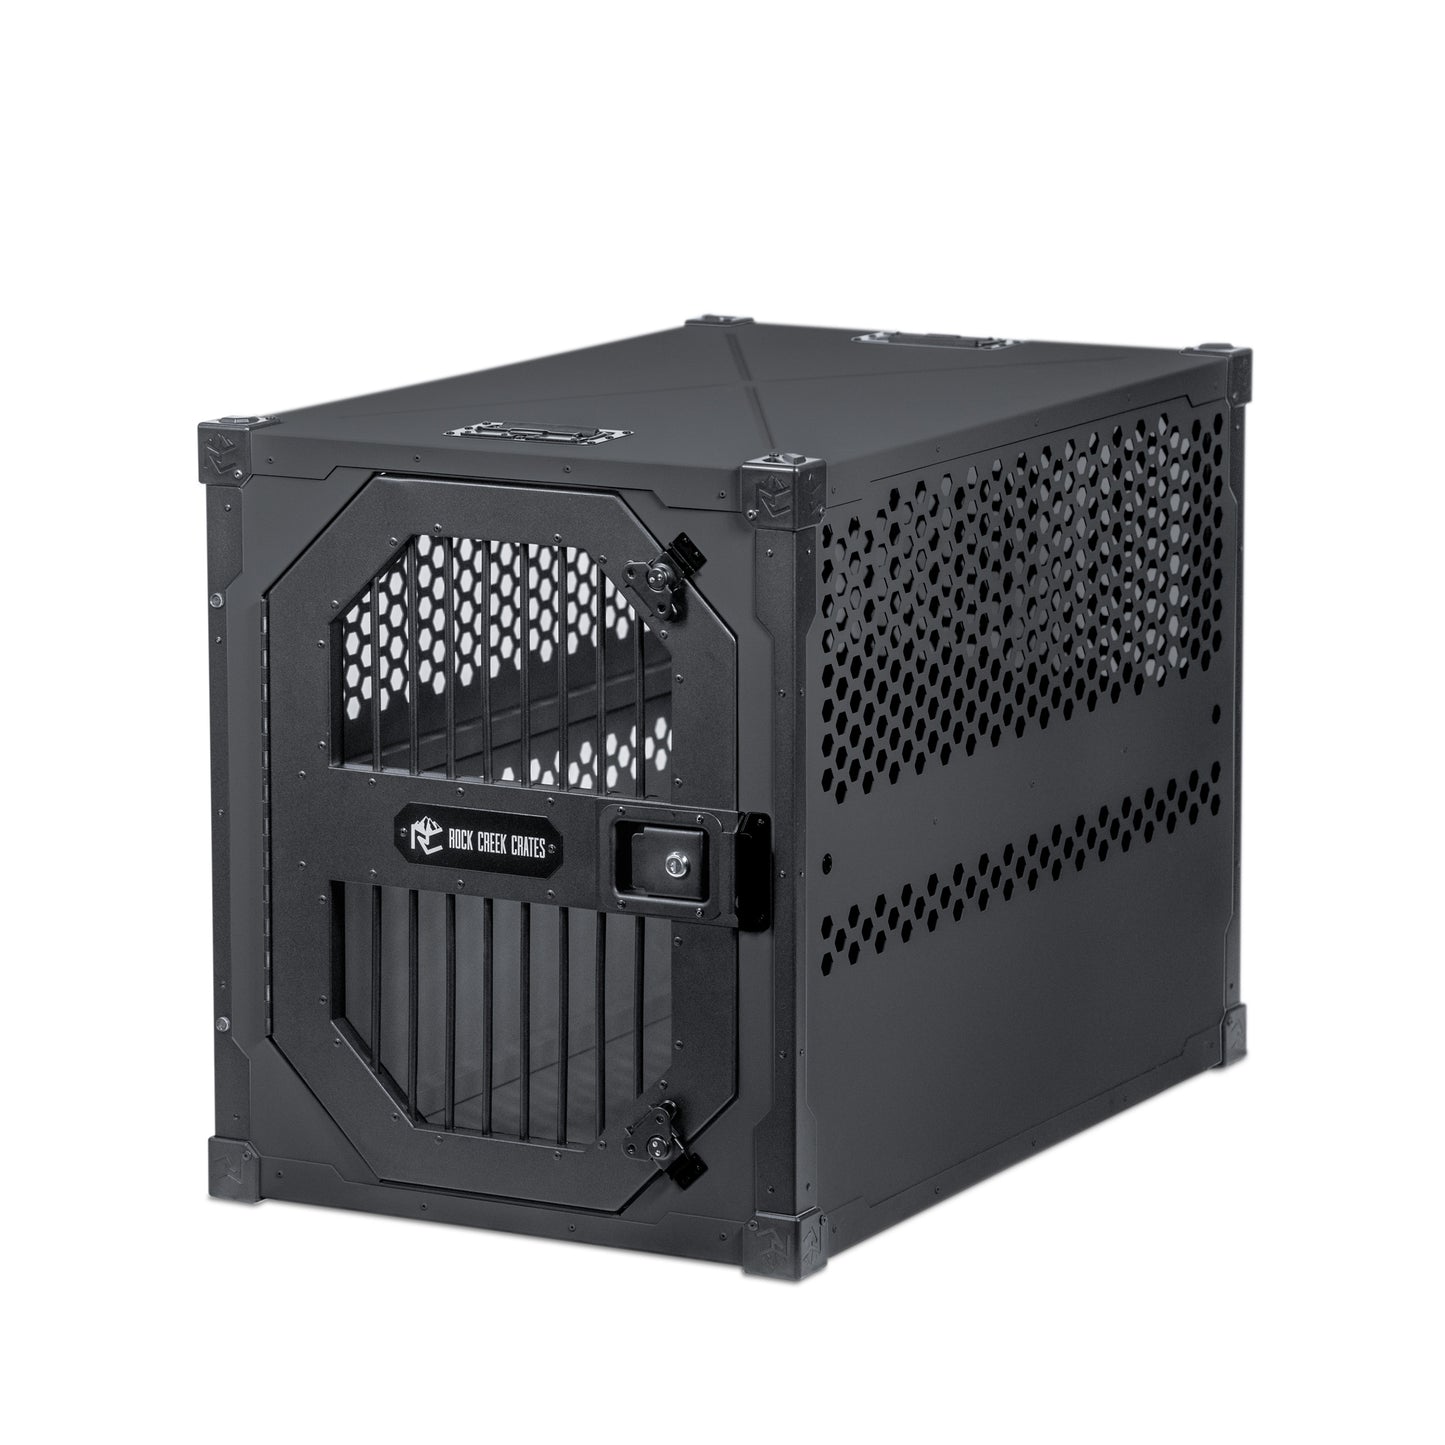 Stationary Dog Crate